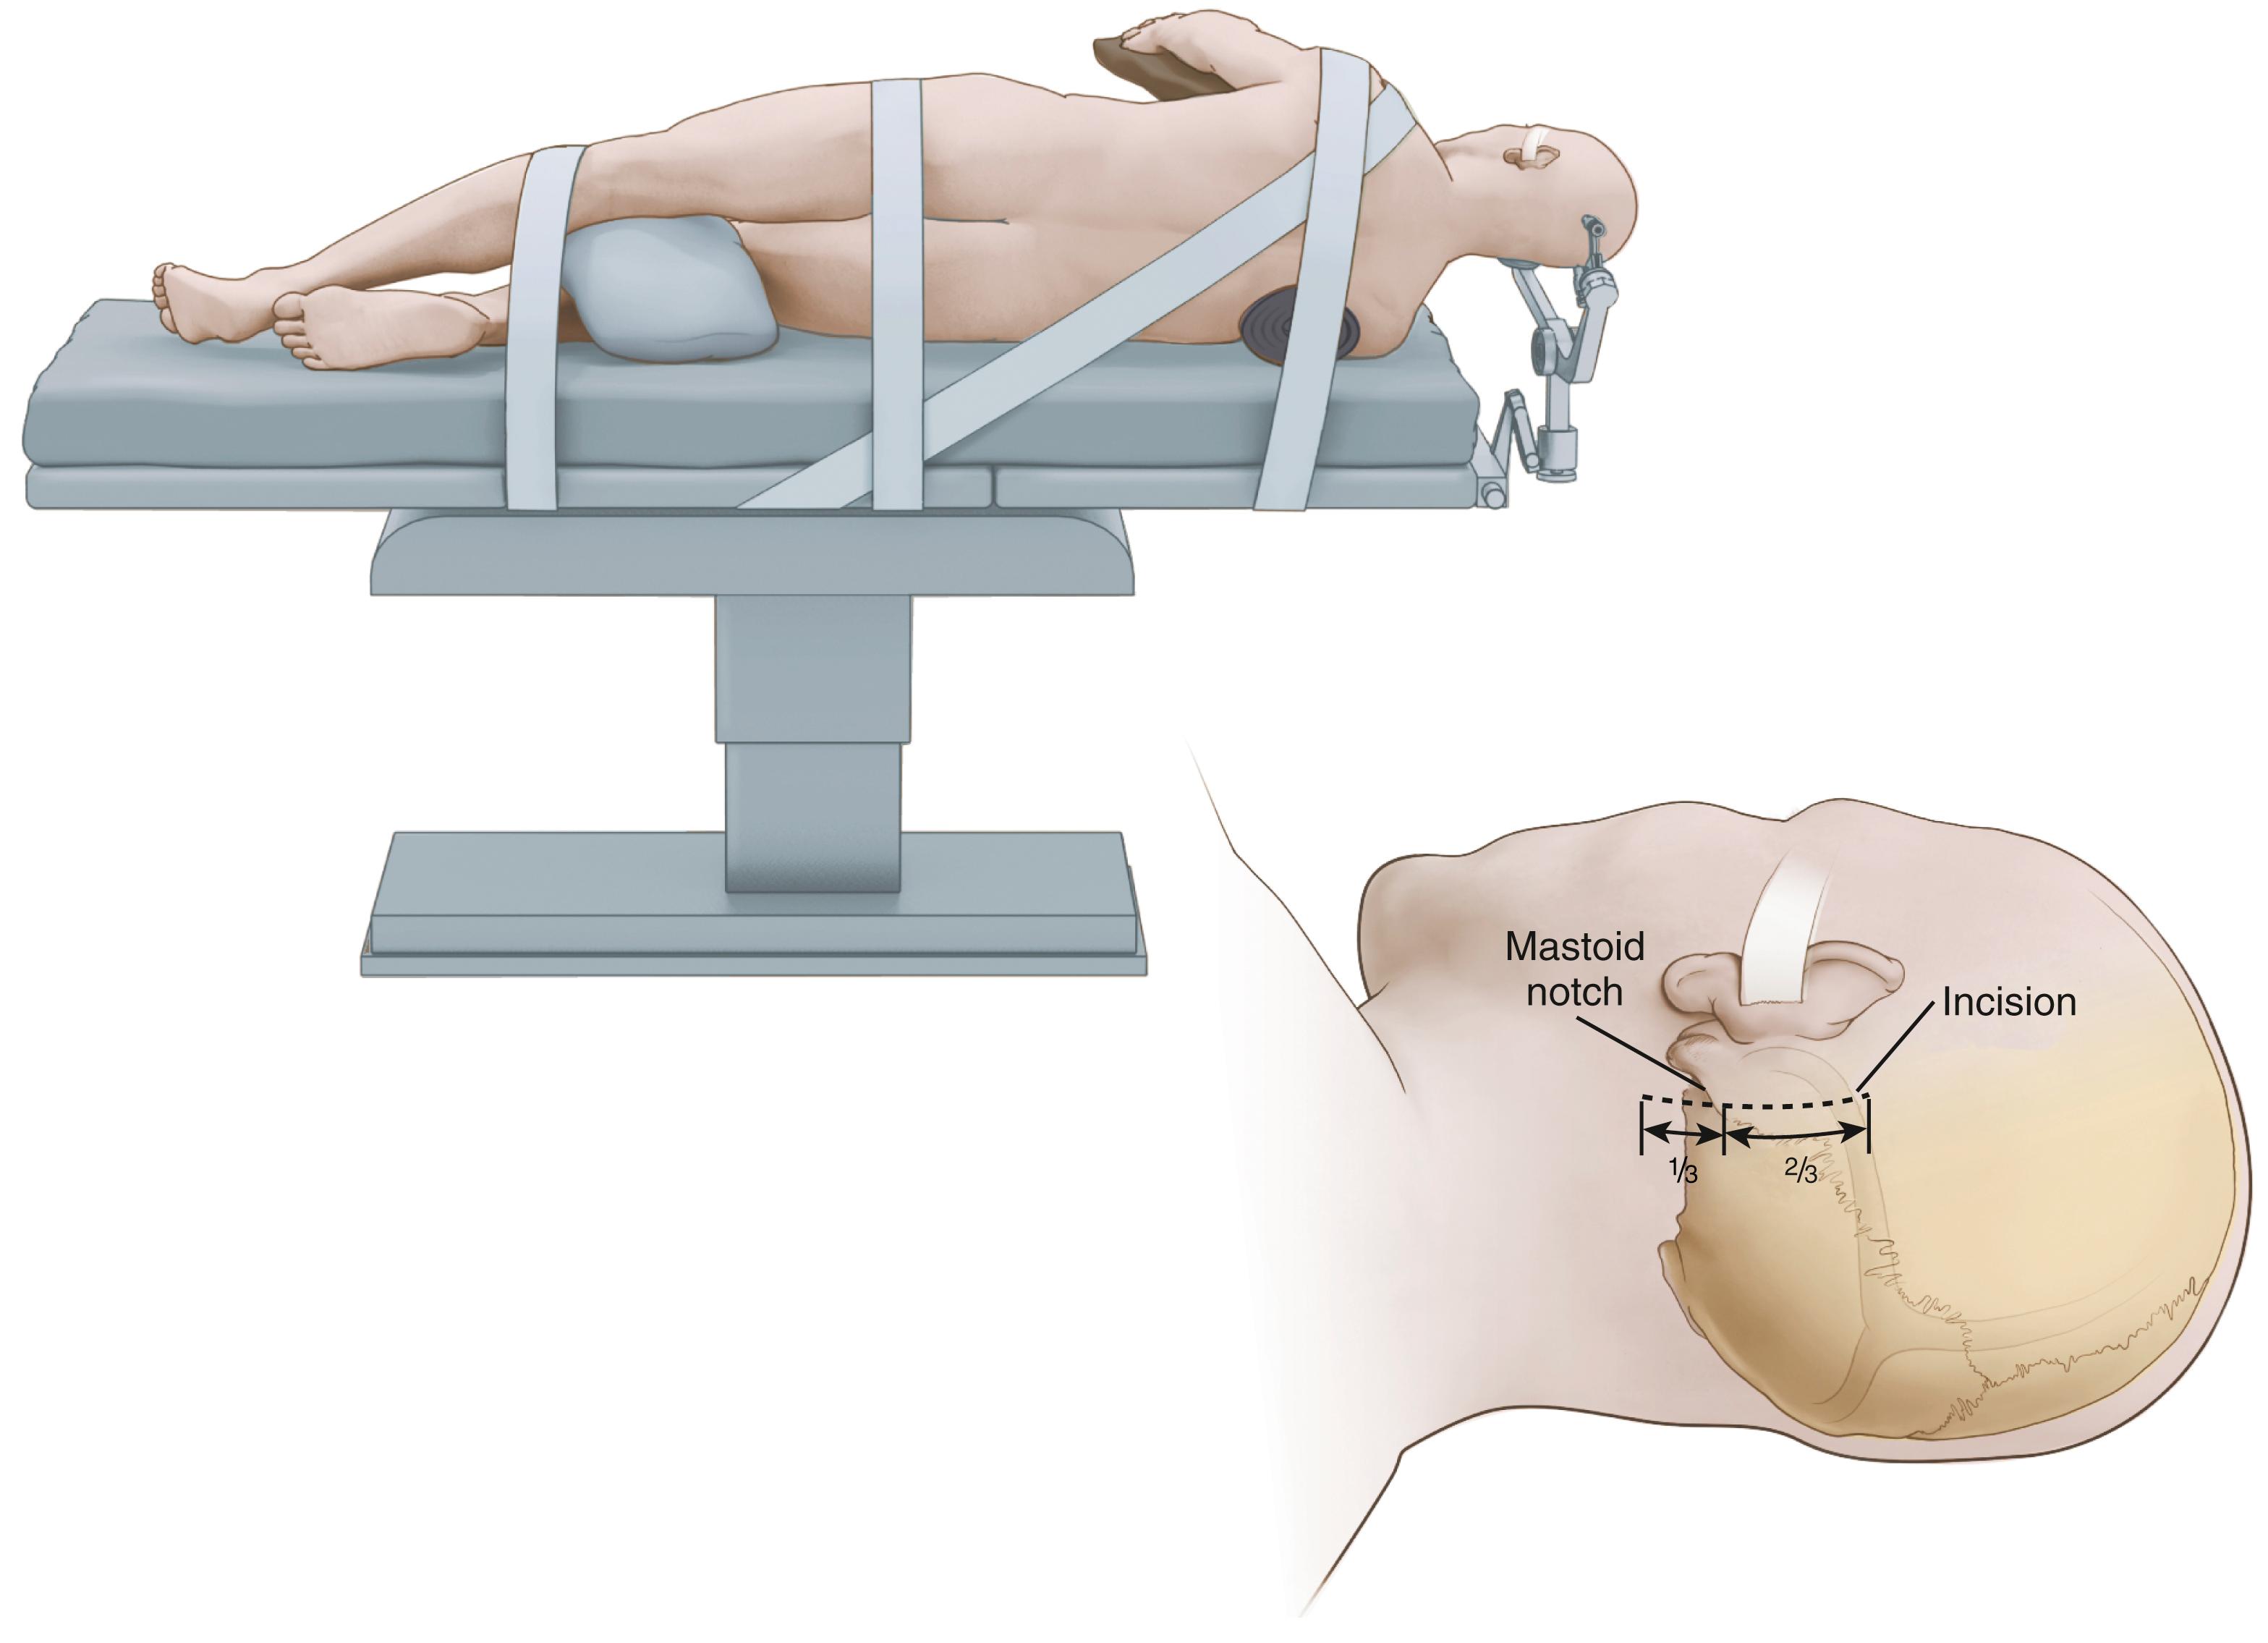 FIGURE 116.1, Patient positioning. Lateral positioning on the operating table for left-sided trigeminal nerve decompression.